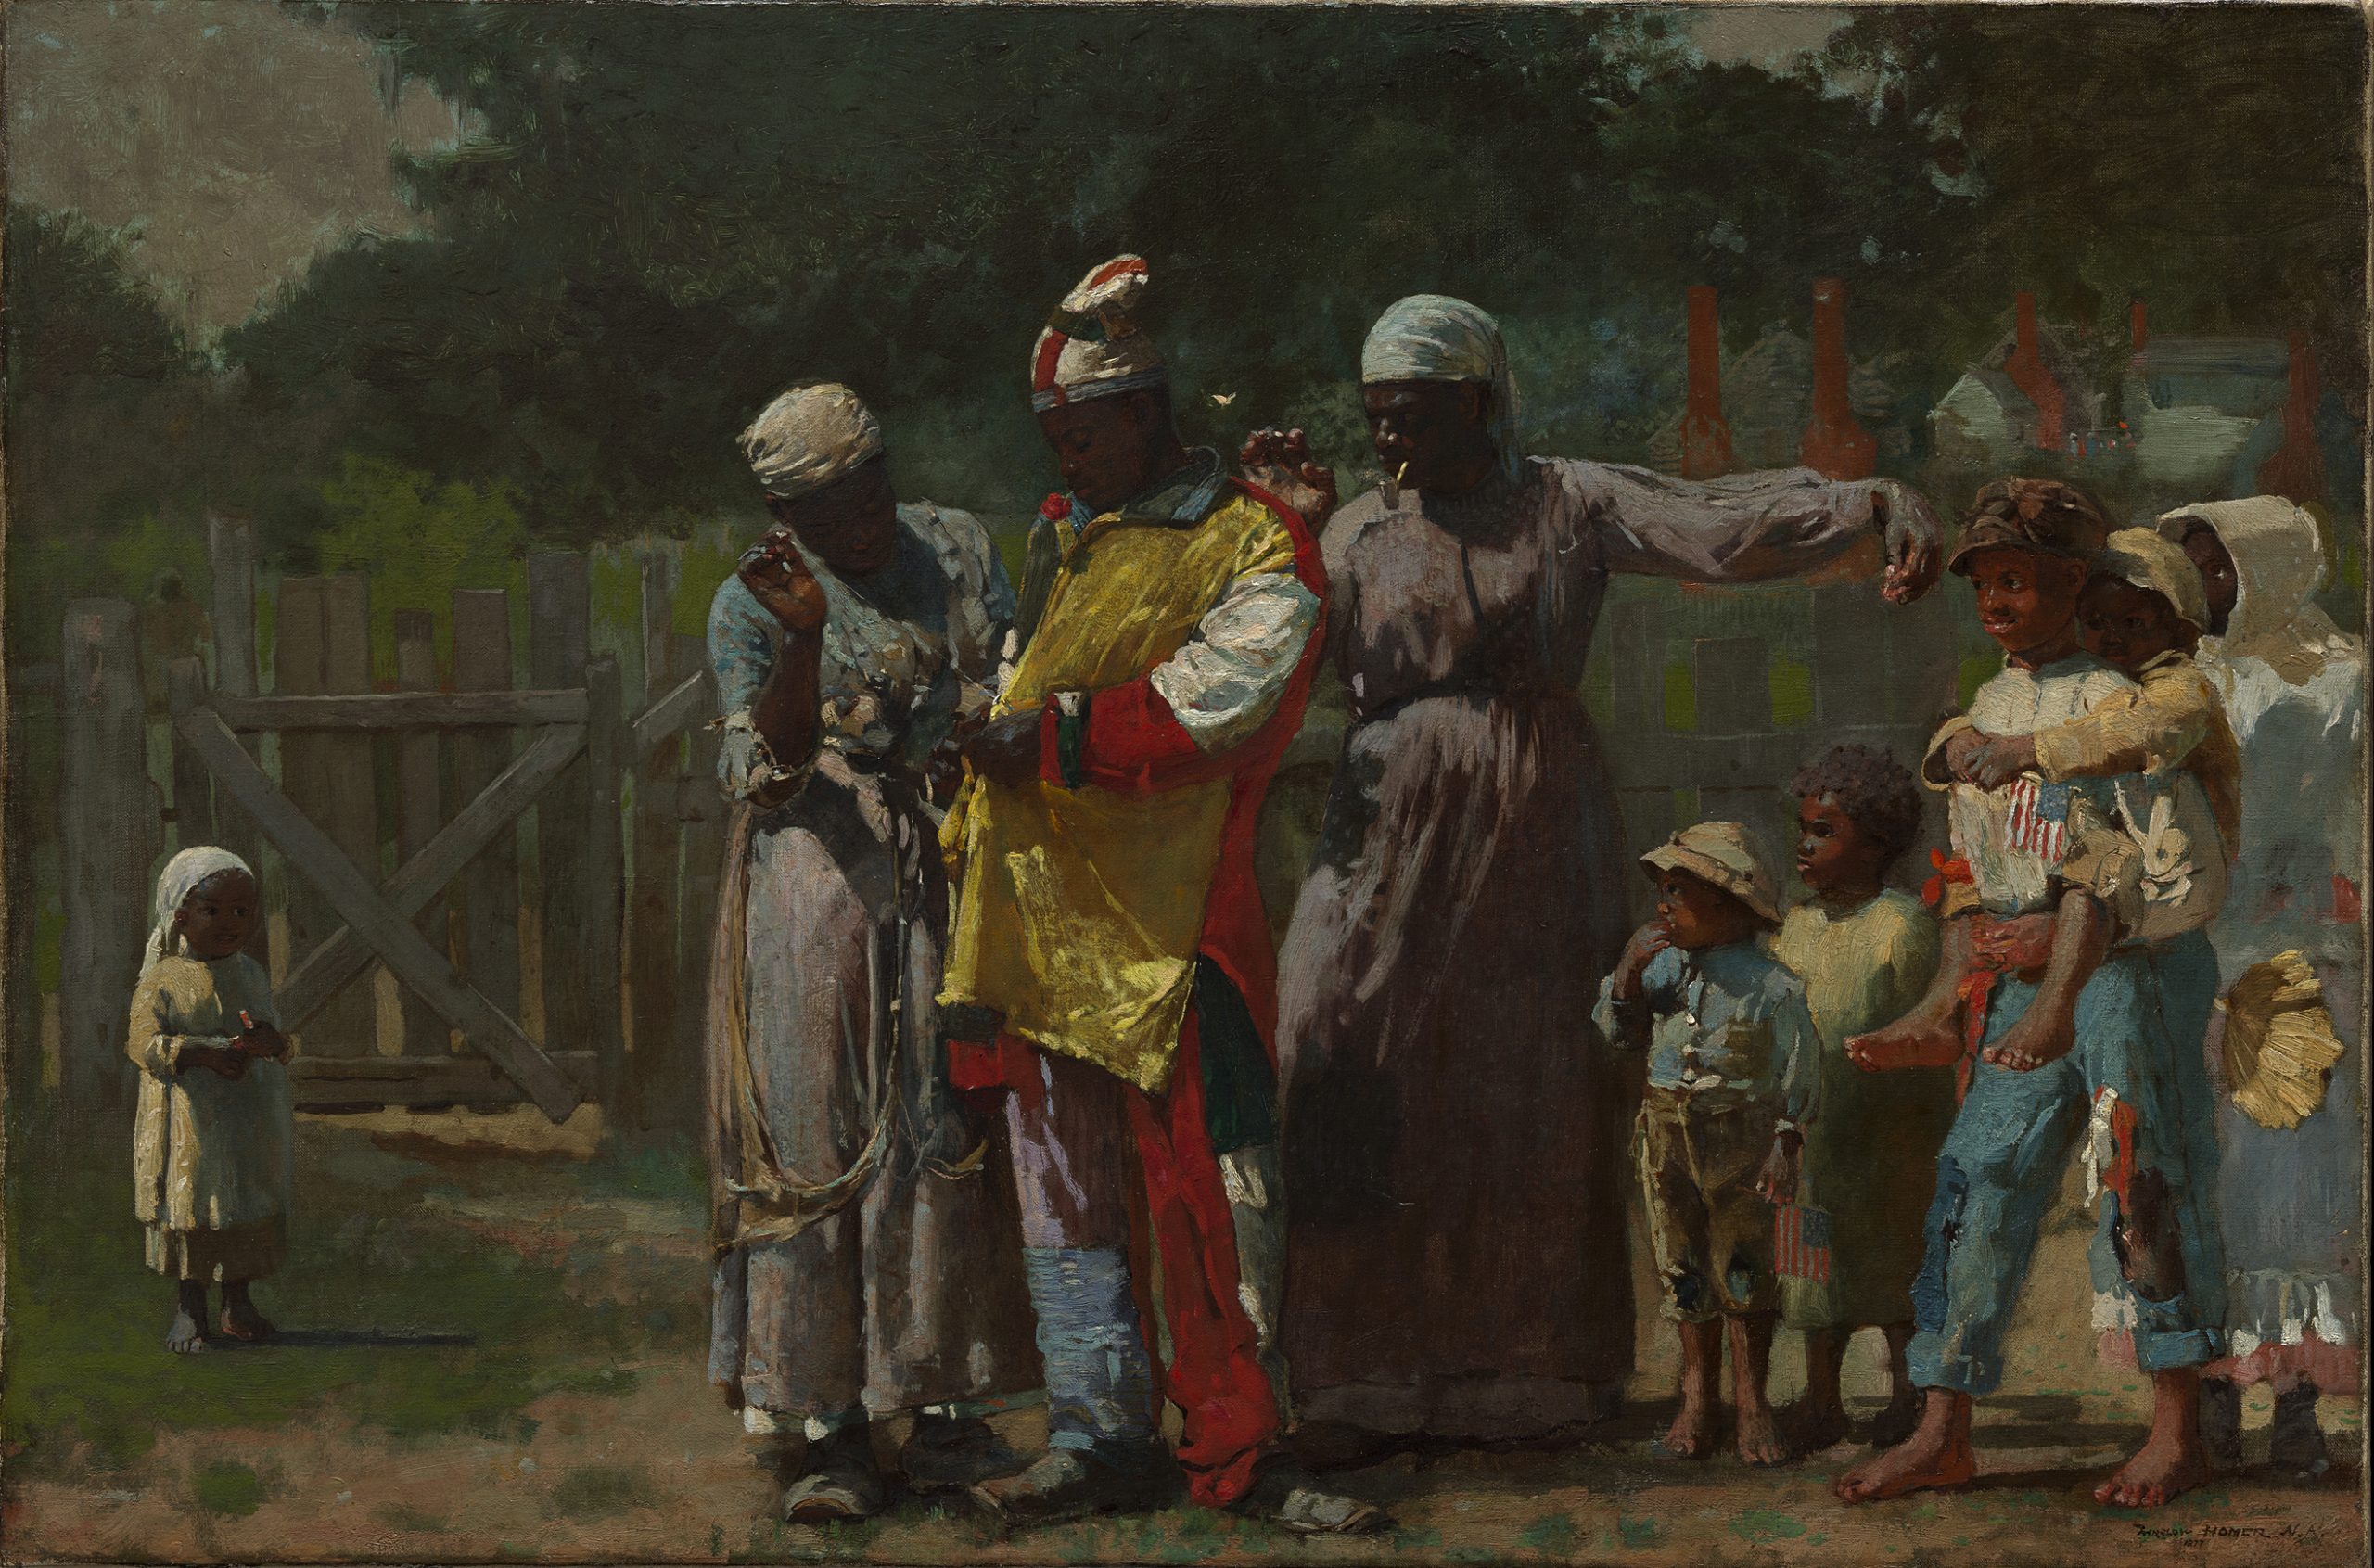 Winslow Homer Dressing for the Carnival, 1877, Oil on canvas, 50.8 x 76.2 cm, The Metropolitan Museum of Art, New York			
Amelia B. Lazarus Fund, 1922 22.220			
© The Metropolitan Museum of Art, New York